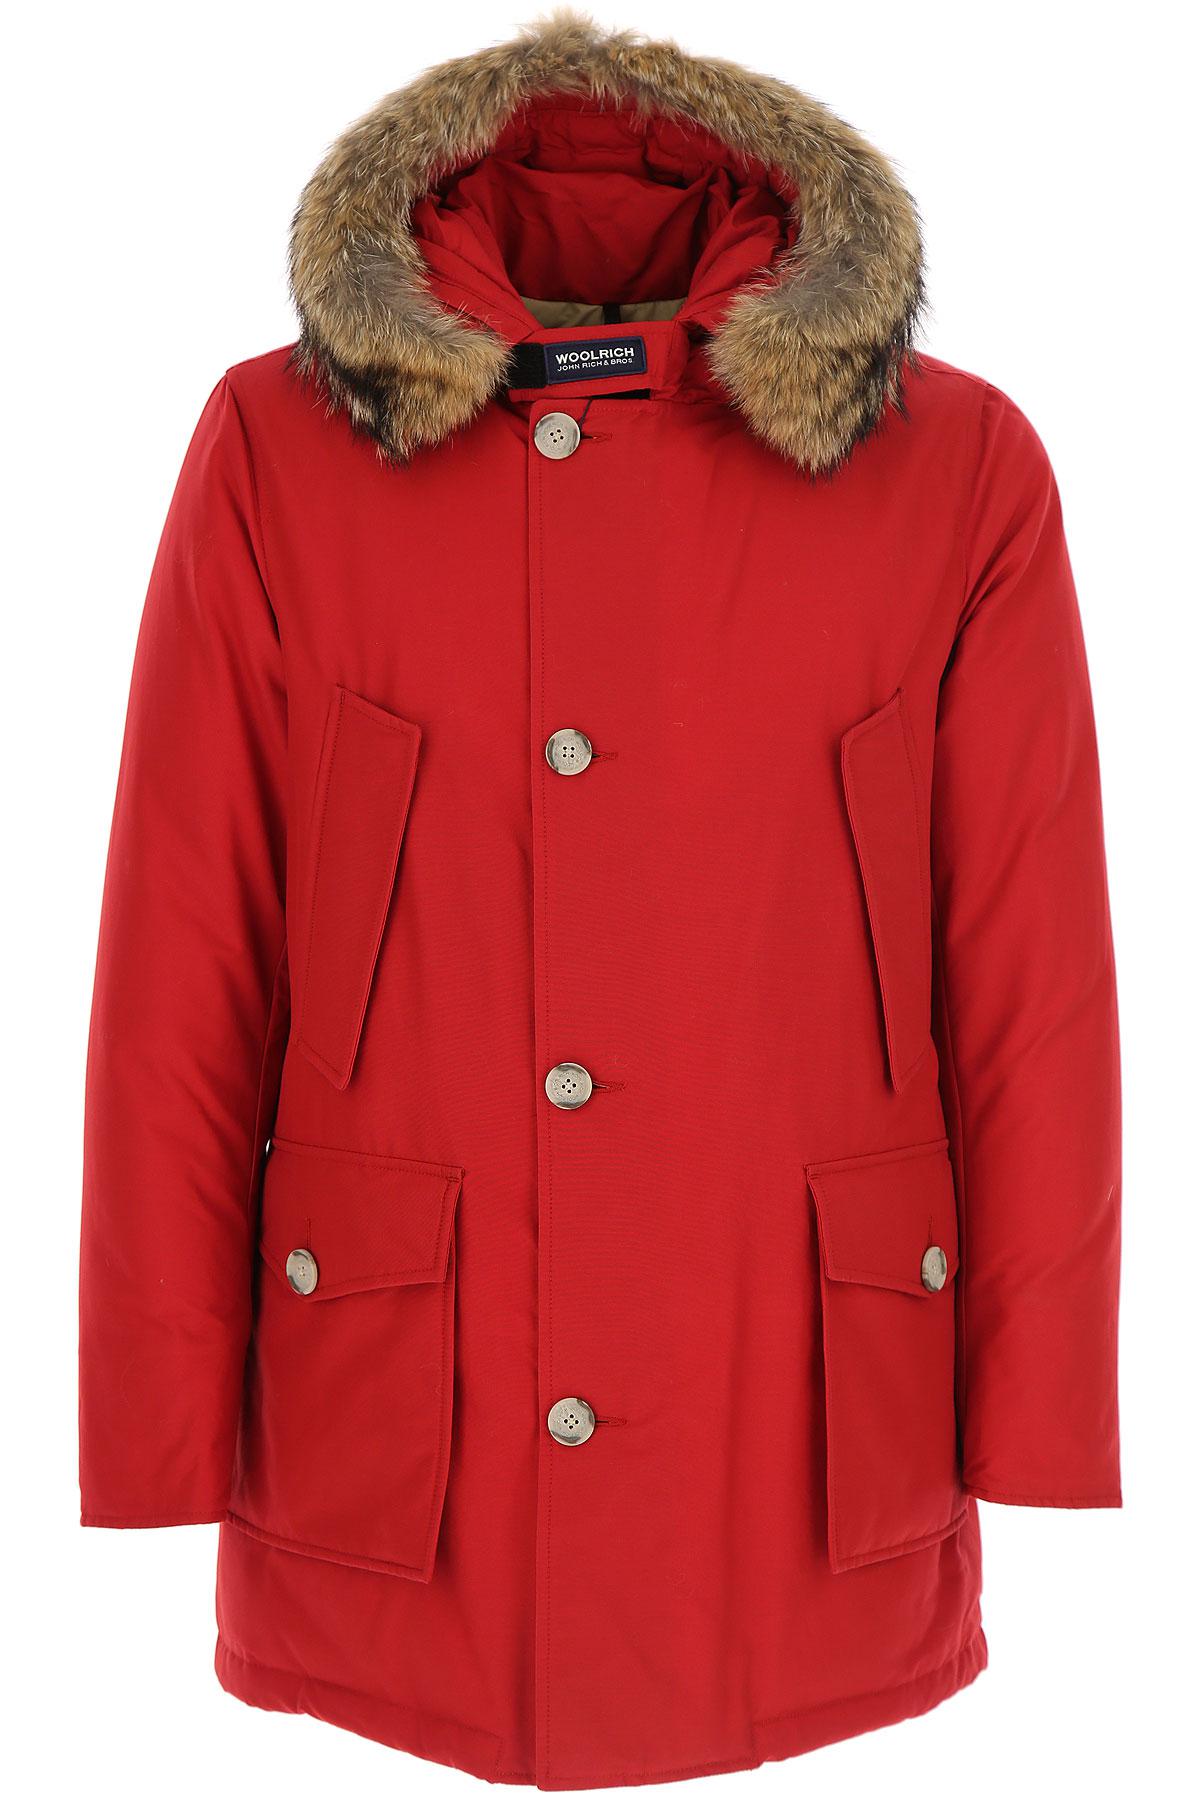 Woolrich Down Jacket For Men in Bright Red (Red) for Men - Lyst